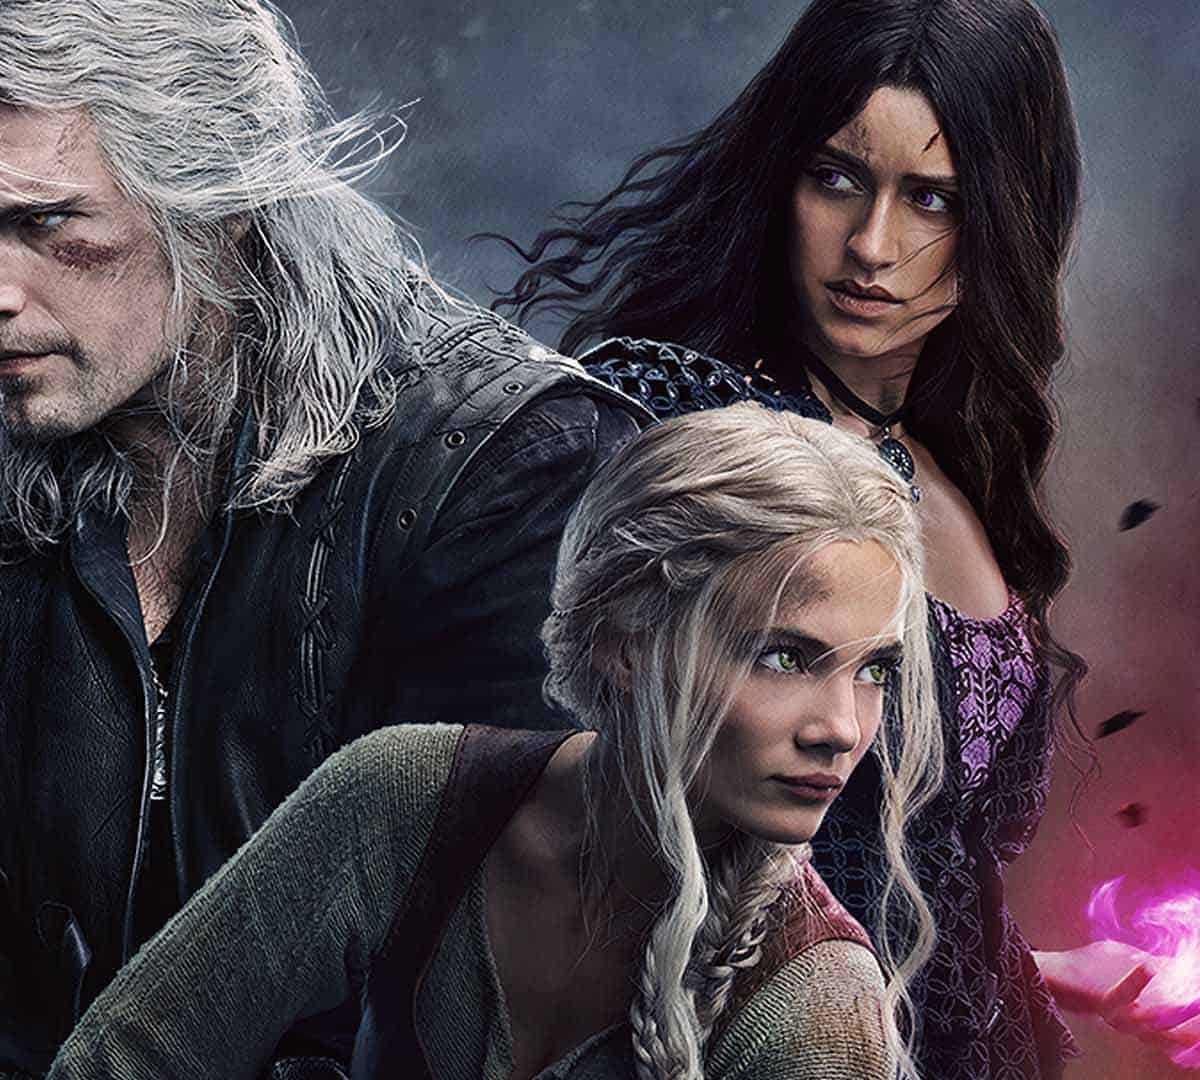 The Witcher Netflix Season 3 will release in two volumes this summer